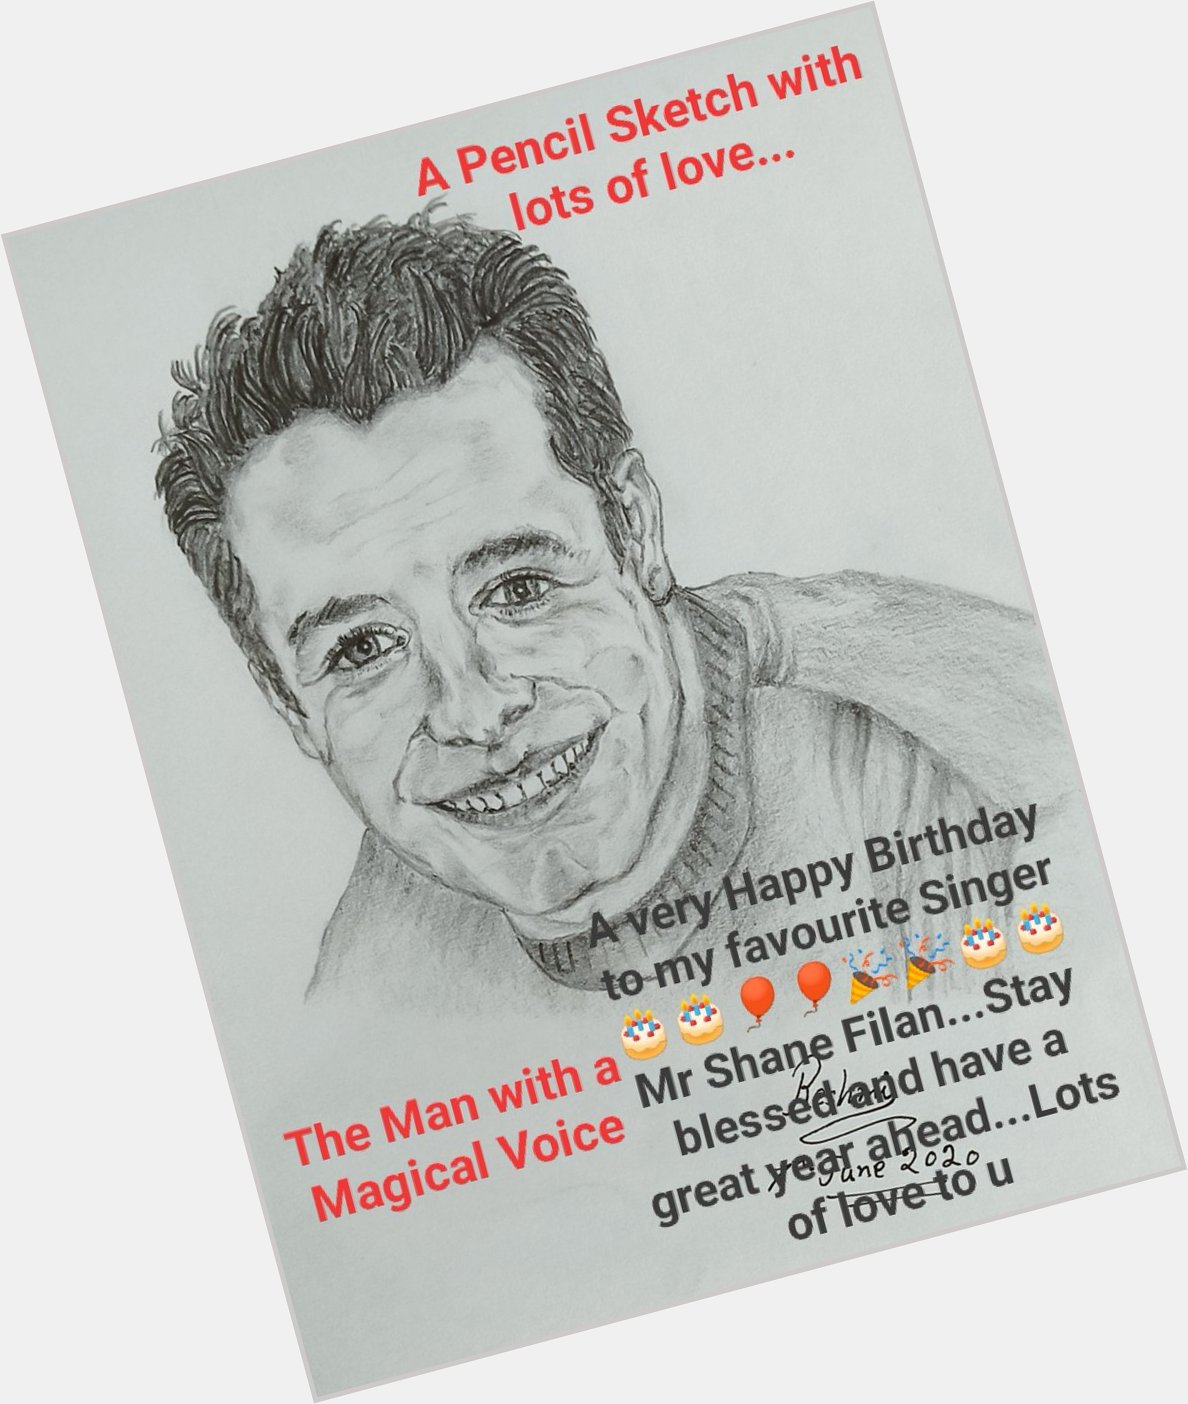 Wishing you a \"Very Happy Birthday\" Mr Shane Filan... Stay blessed....  